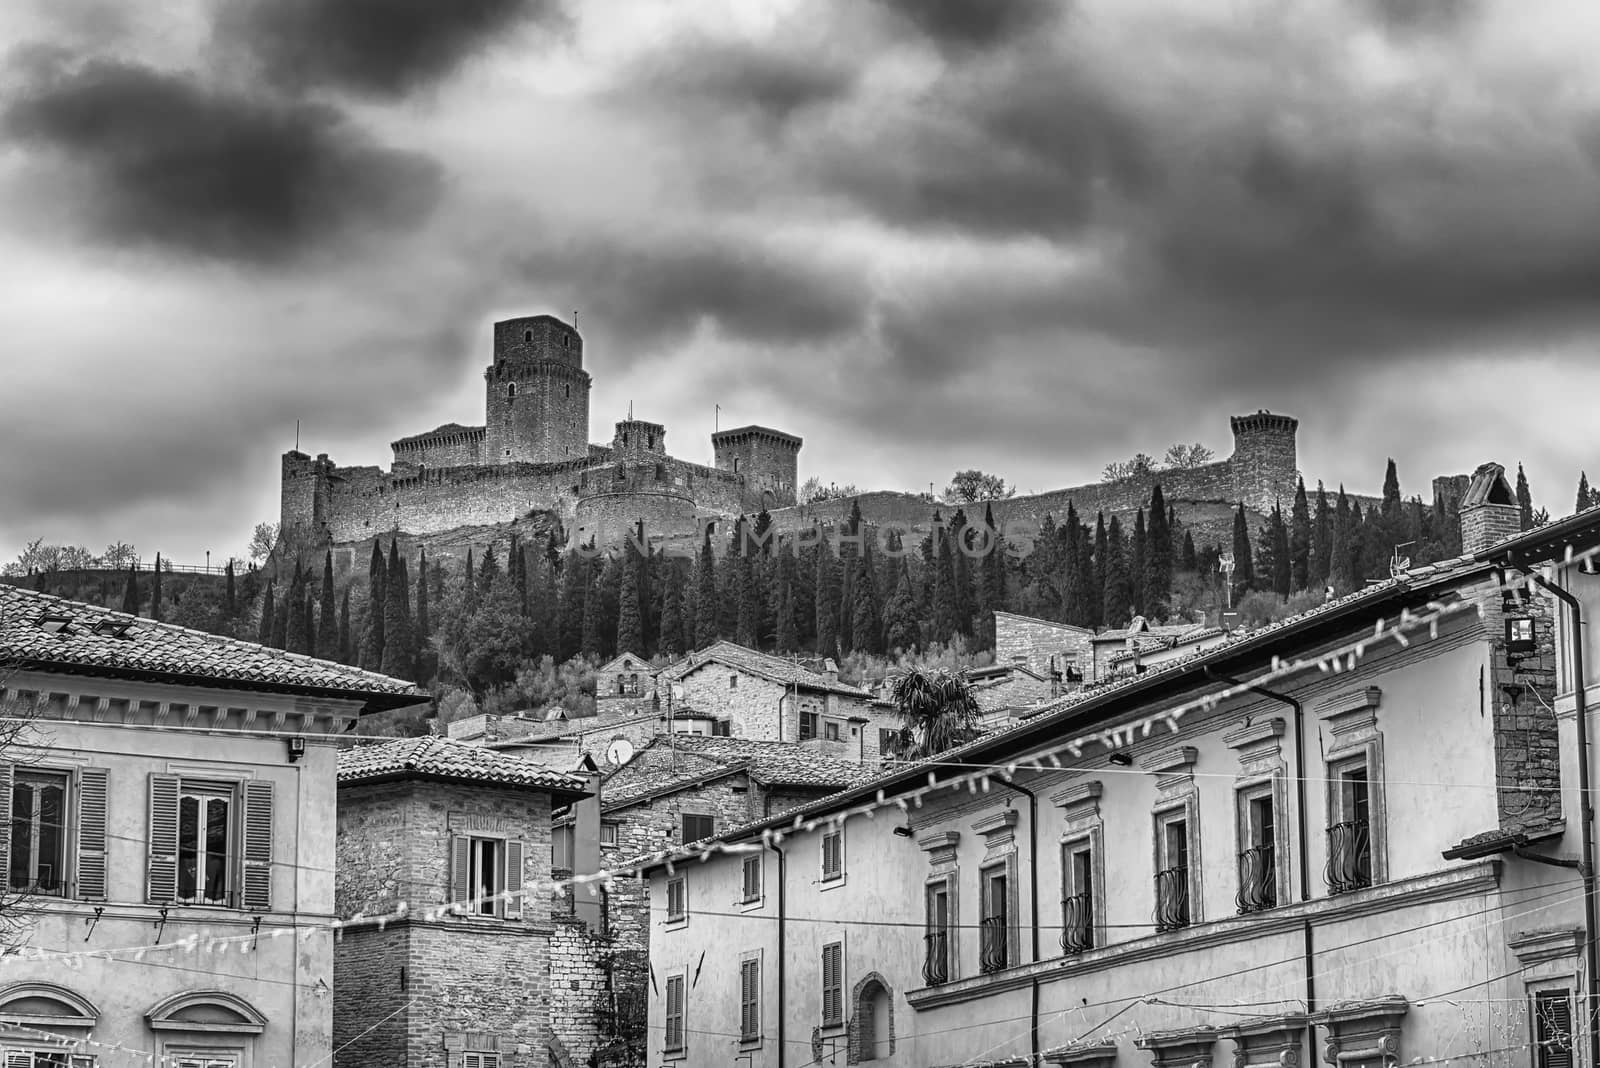 View of Rocca Maggiore, medieval fortress dominating the city of Assisi, one of the most beautiful medieval towns in central Italy